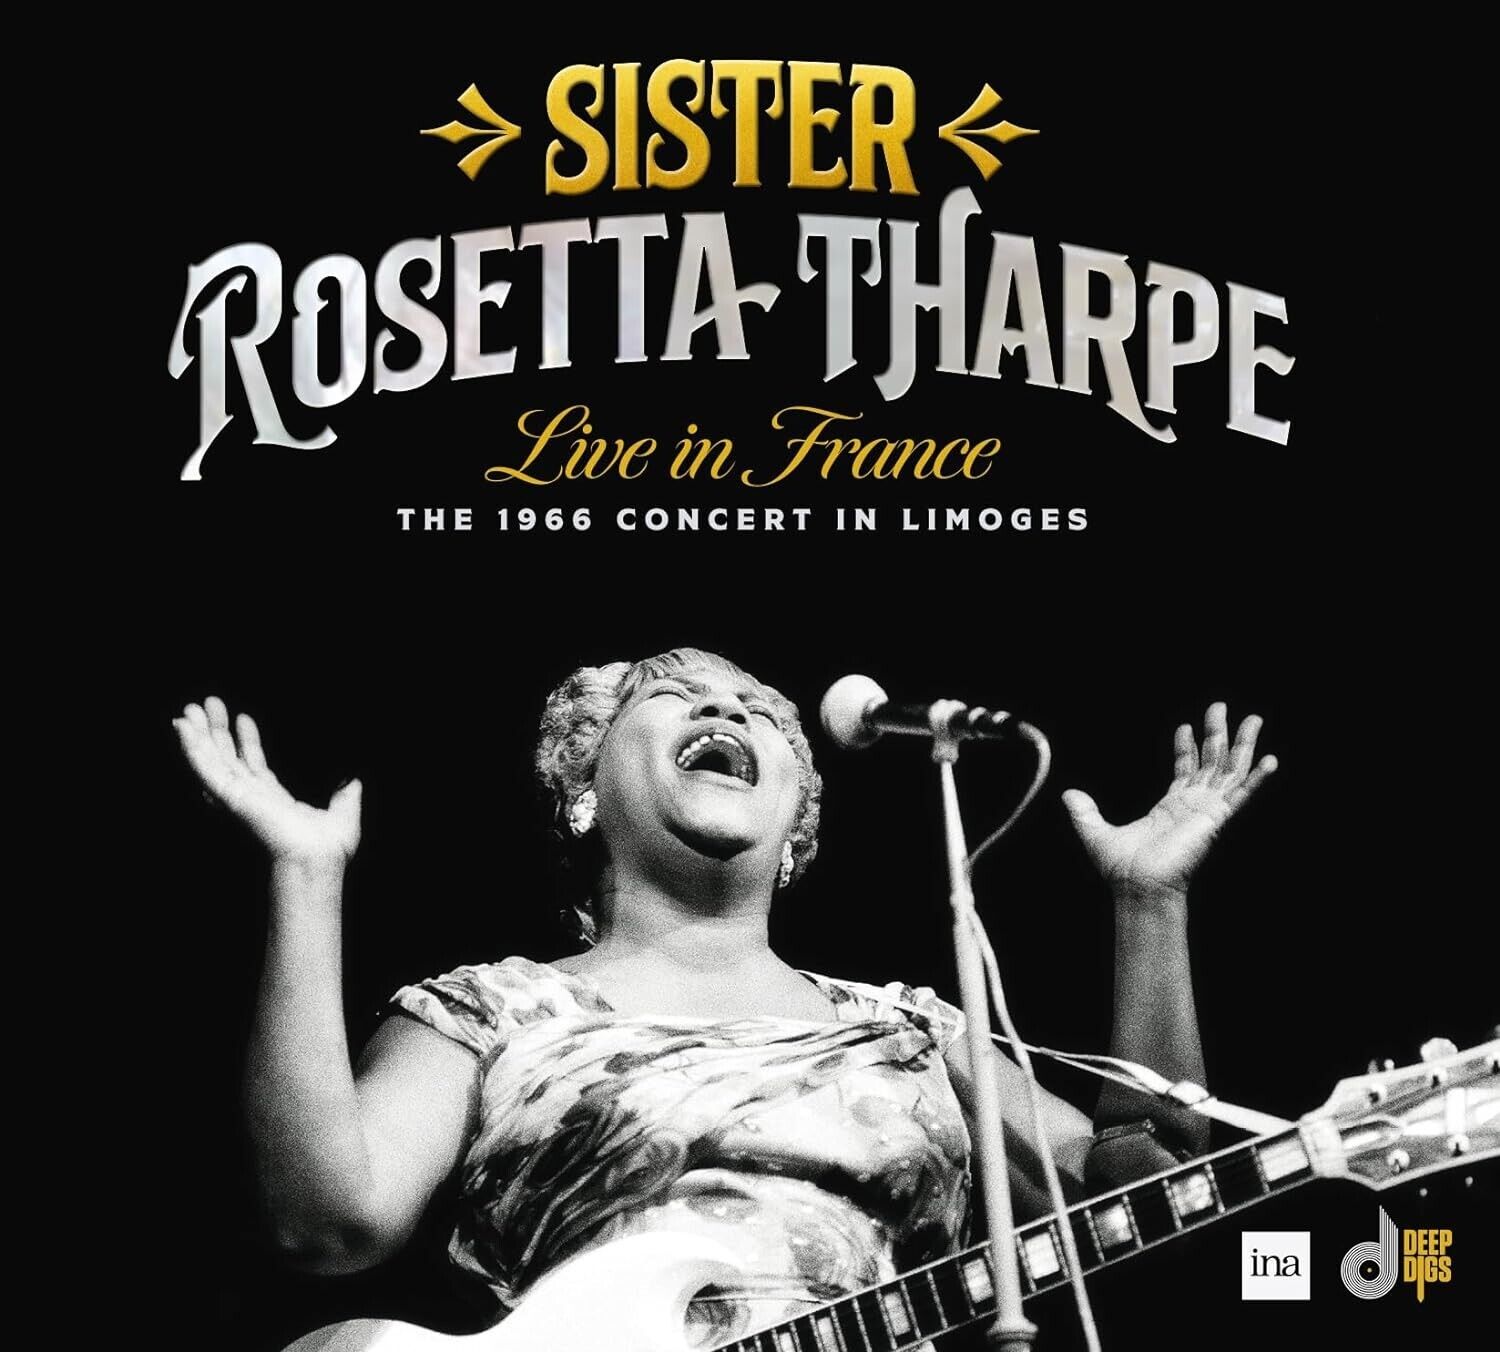 Live In France: The 1966 Concert In Limoges by Sister Rosetta Tharpe CD Apr/26